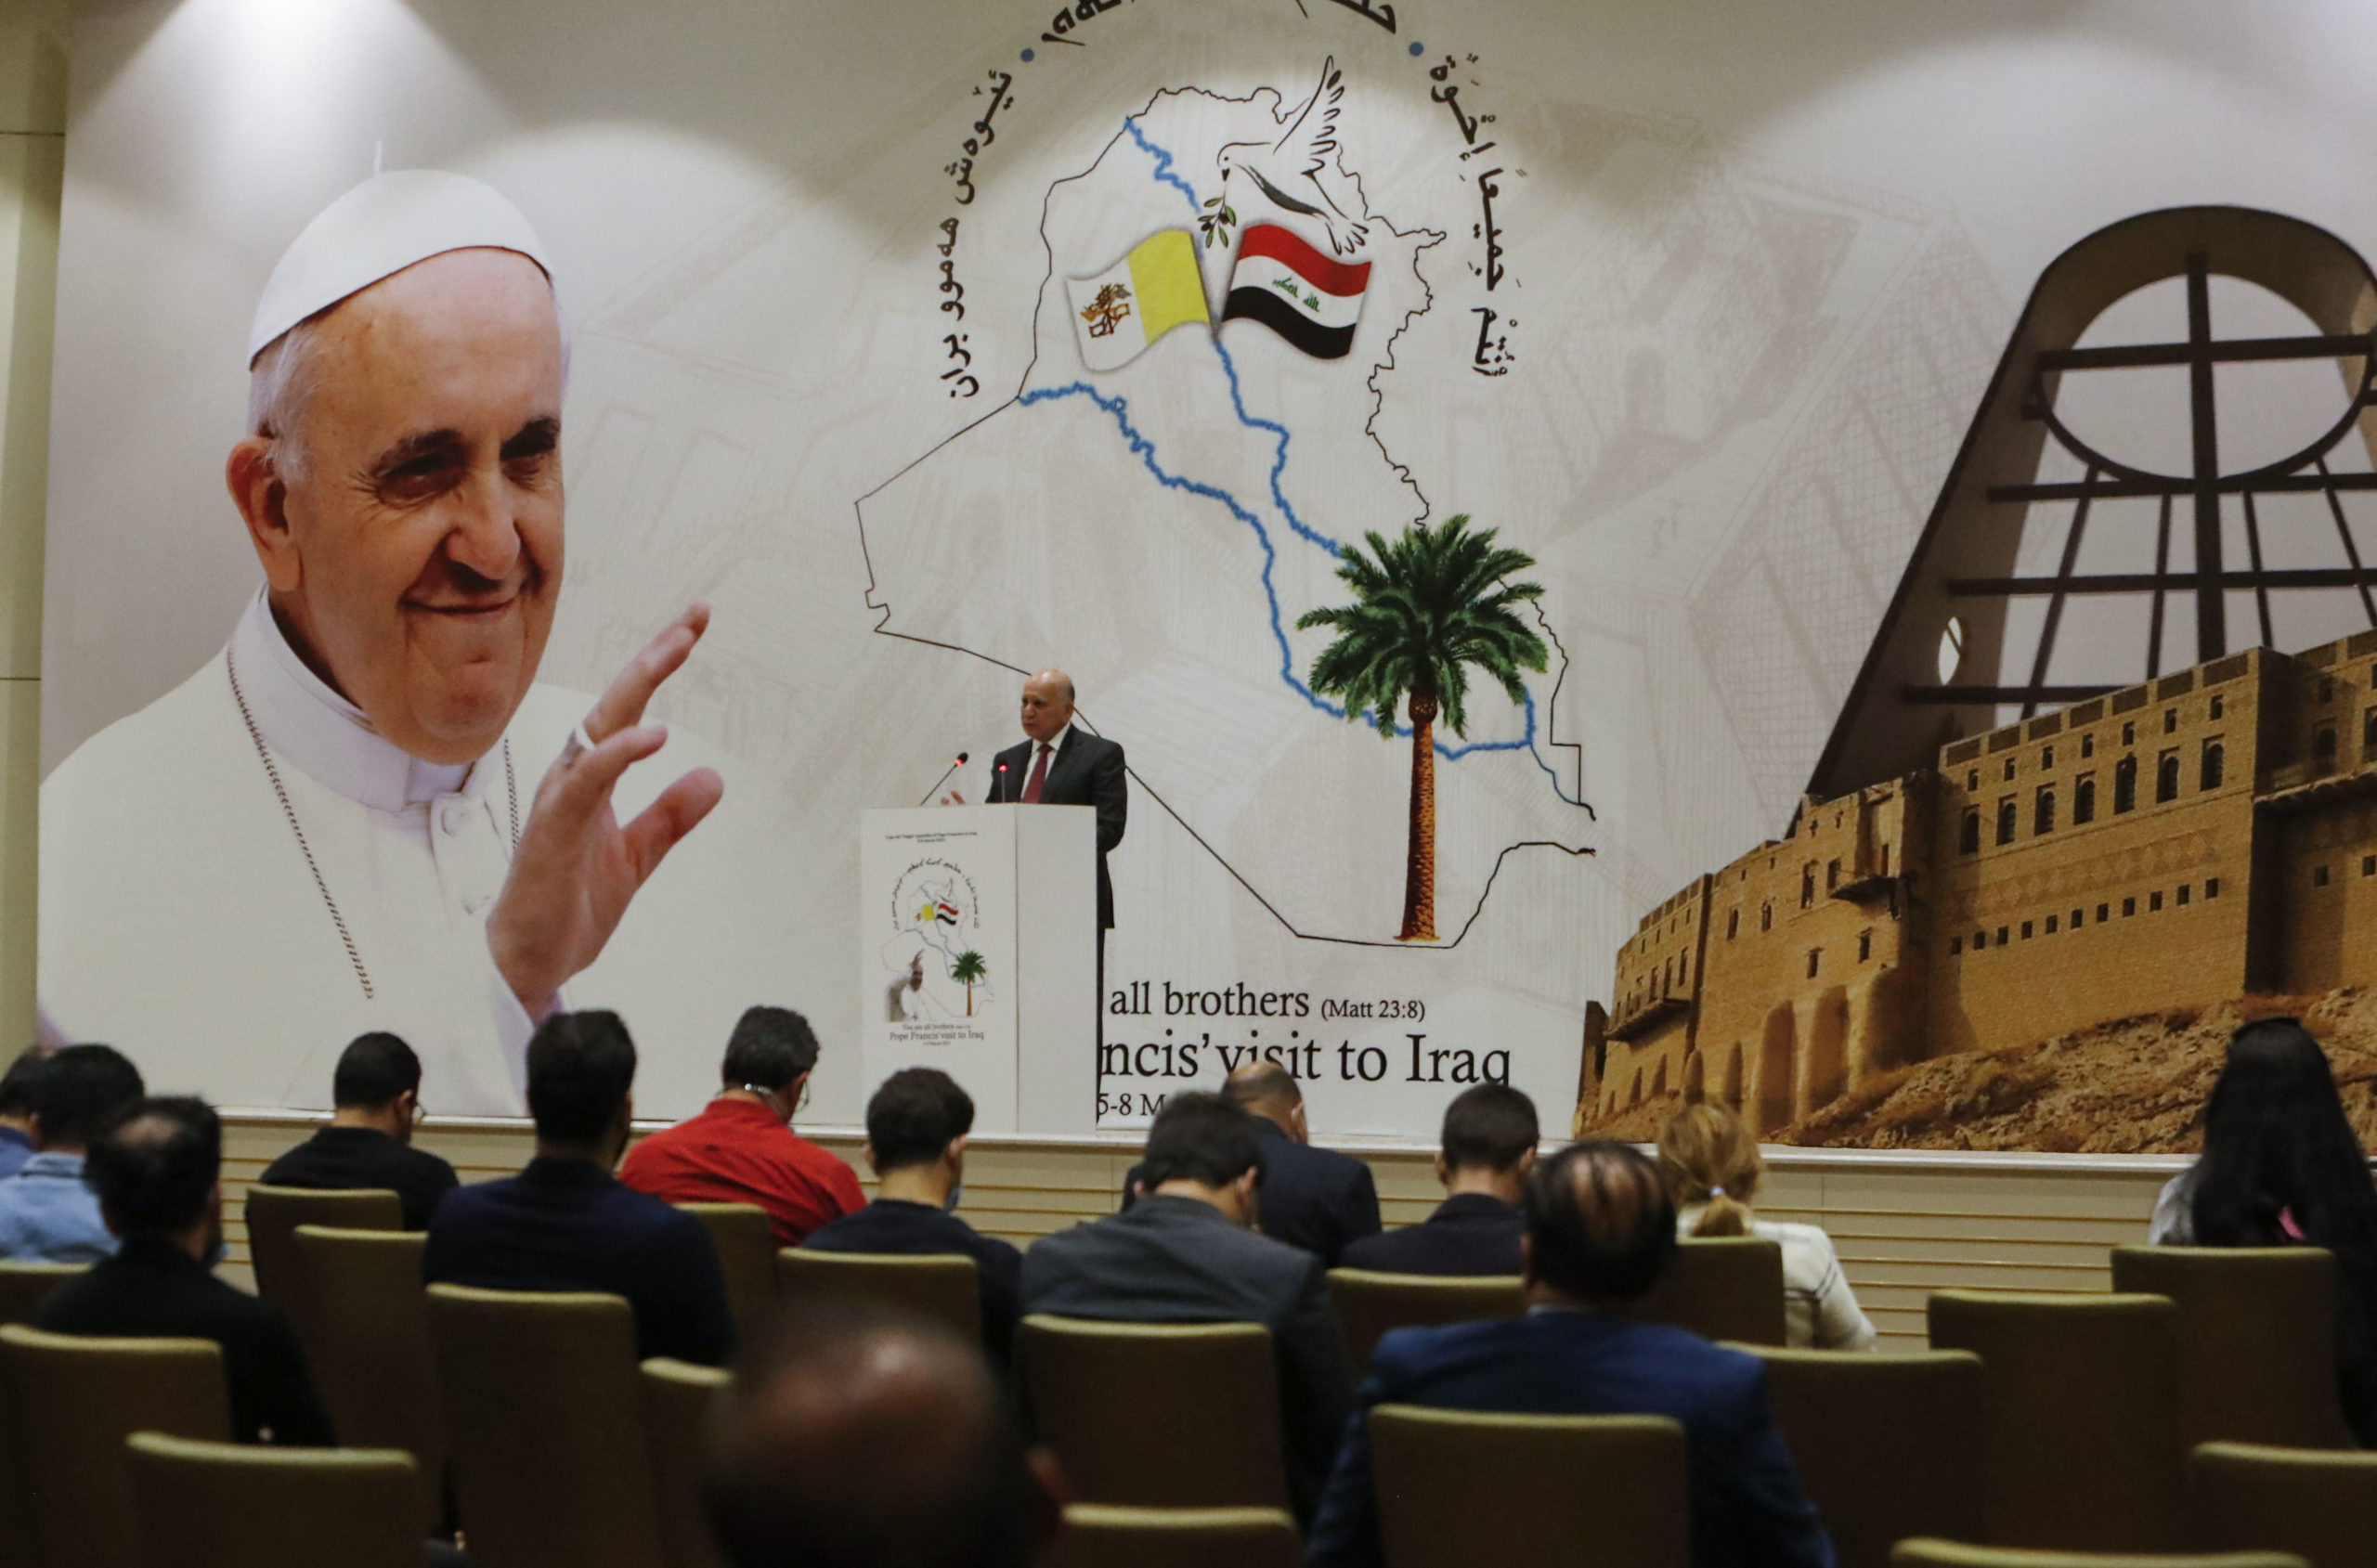 Pilgrim of peace' Pope Francis heads to war-scarred Iraq | Inquirer News